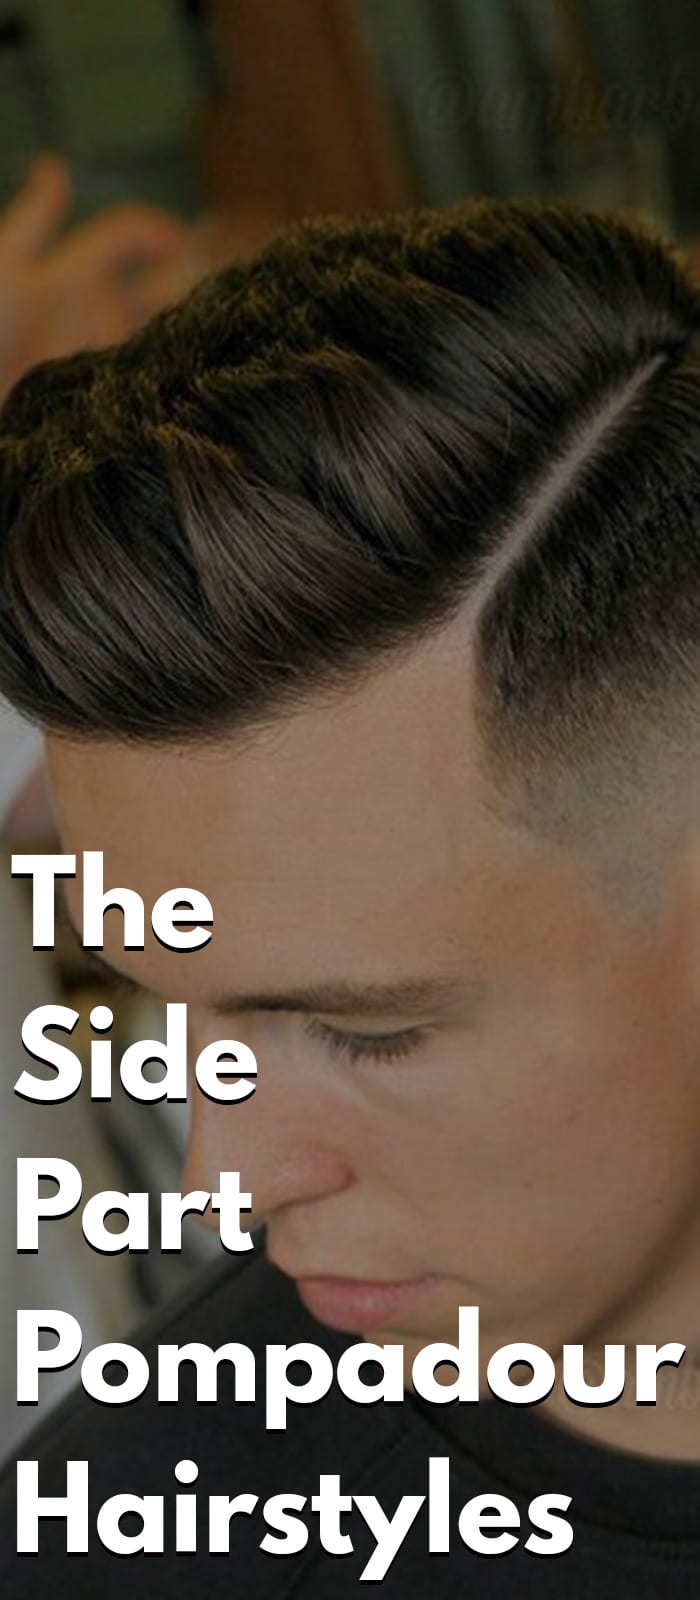 The Side Part Pompadour Hairstyle